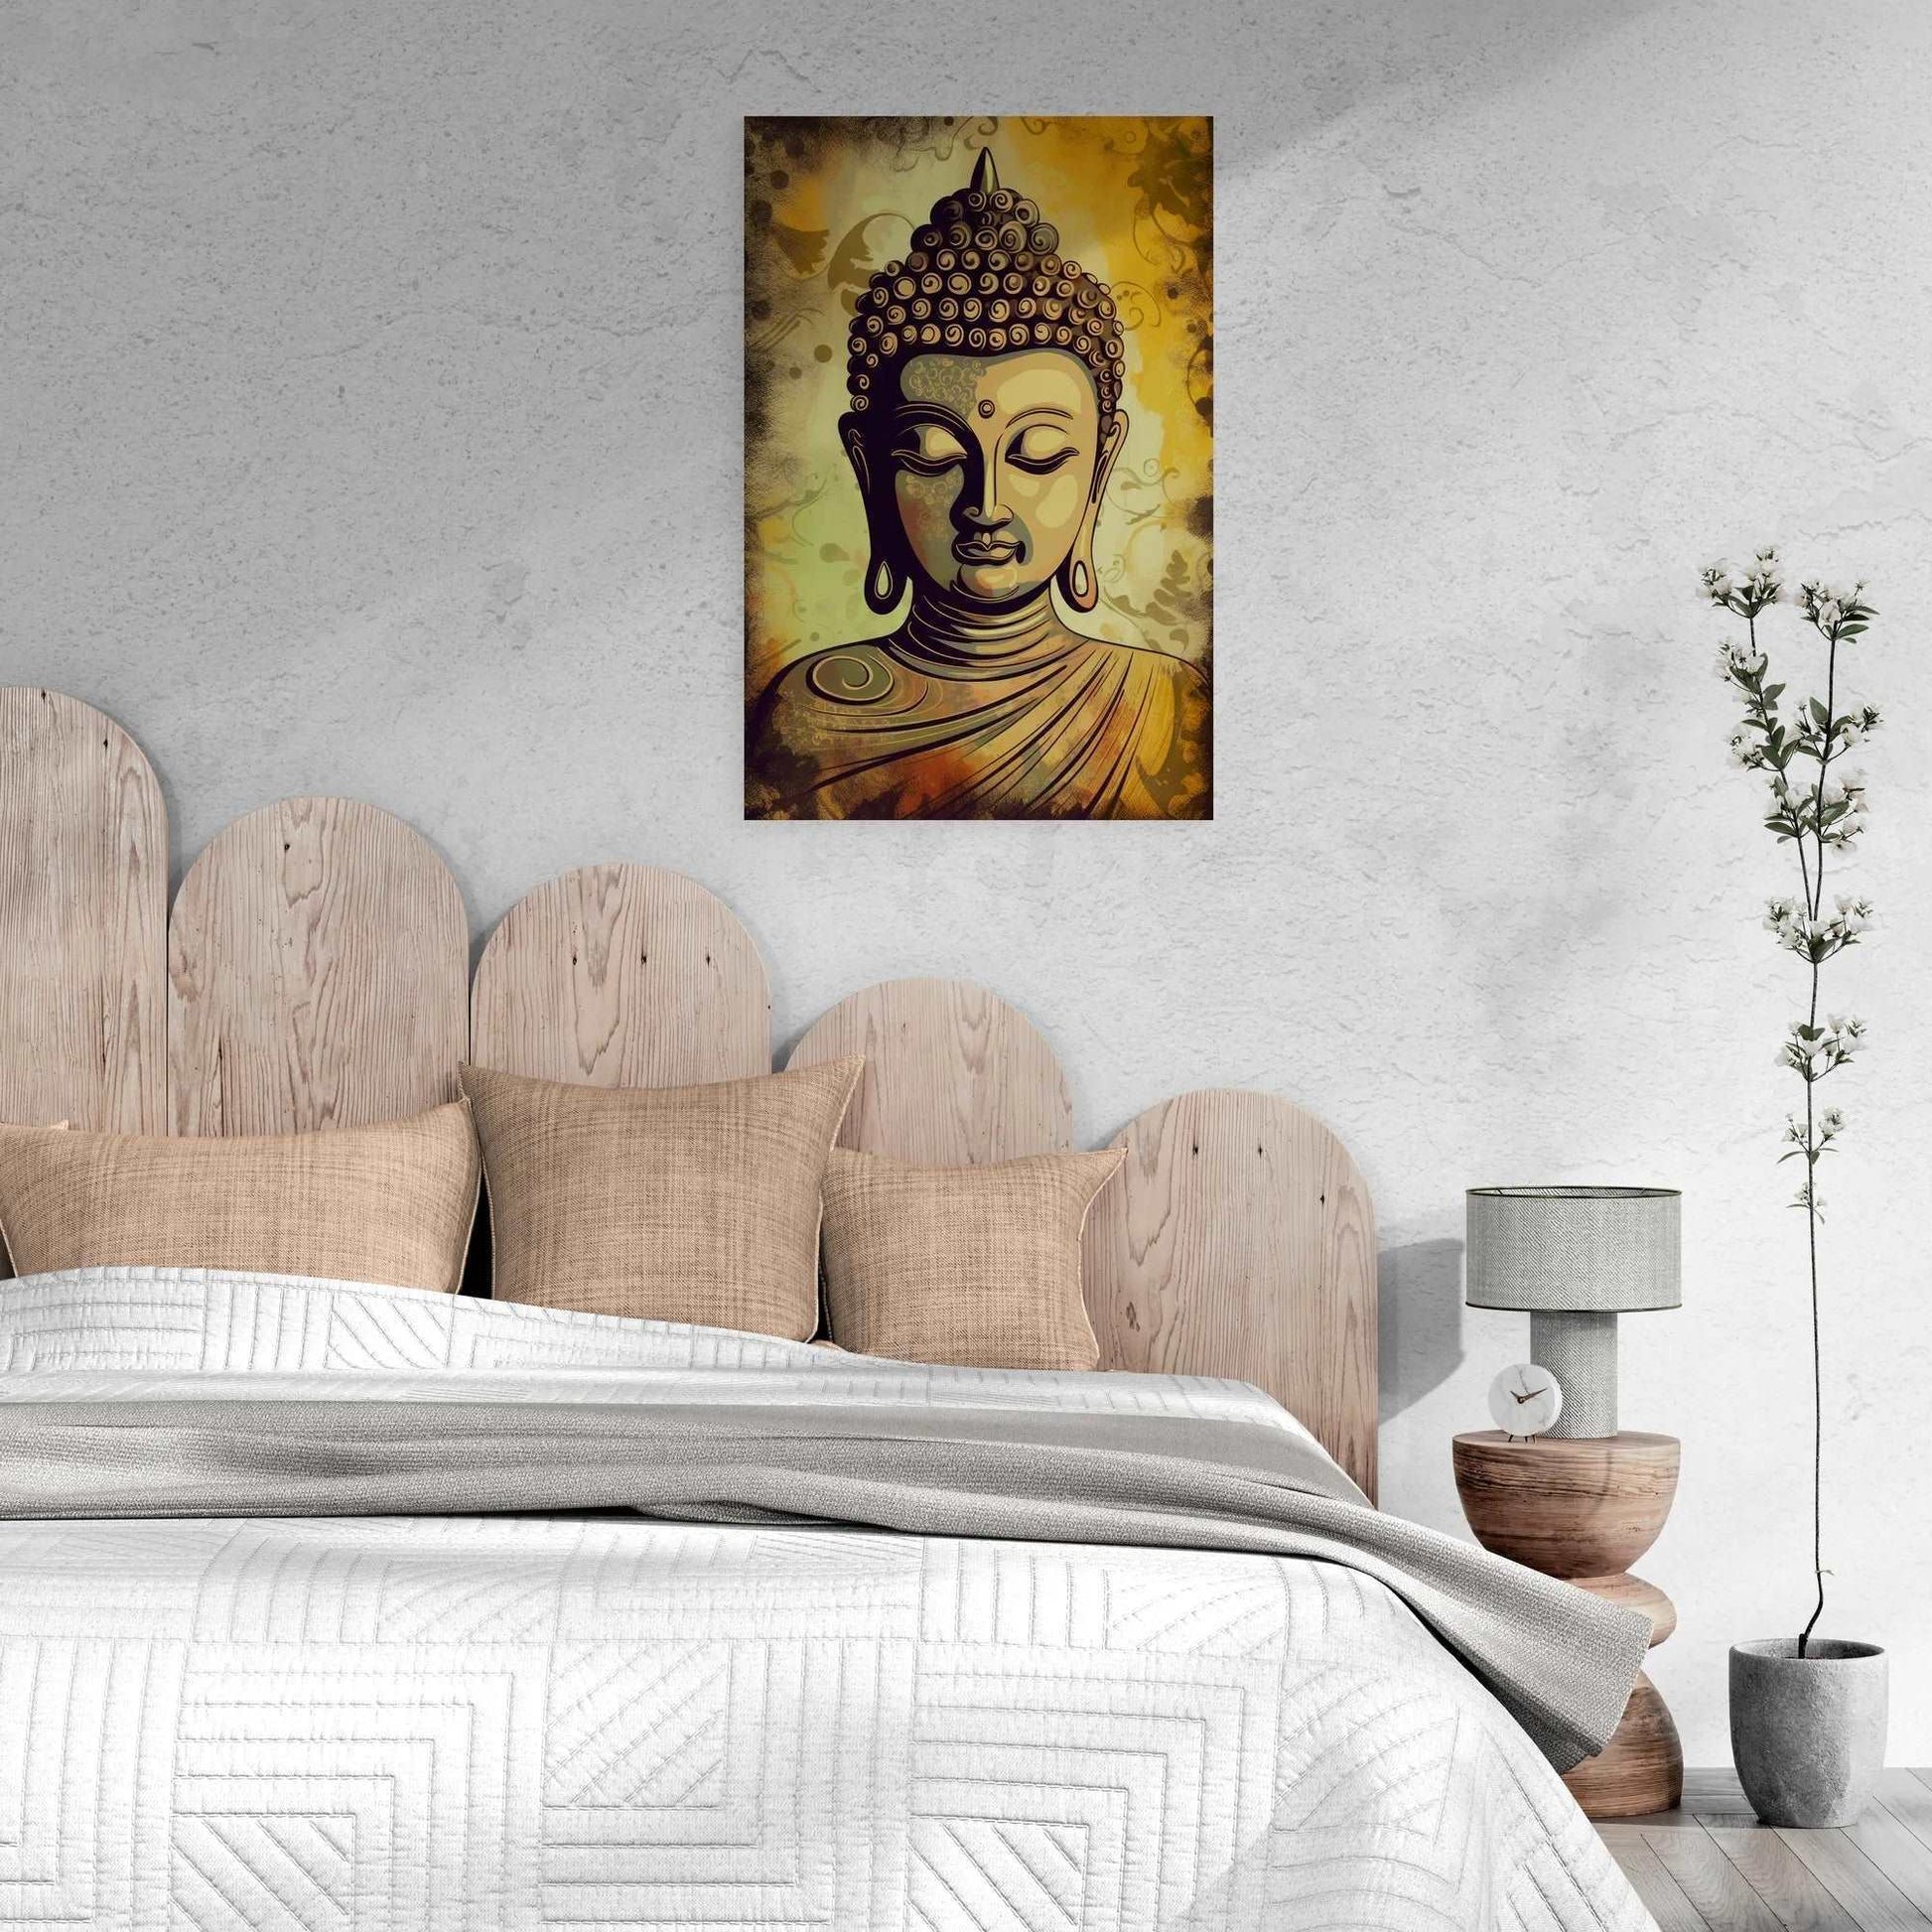 Serene Buddha head poster in golden yellow, amber, and brown tones without text, printed on premium matte paper.